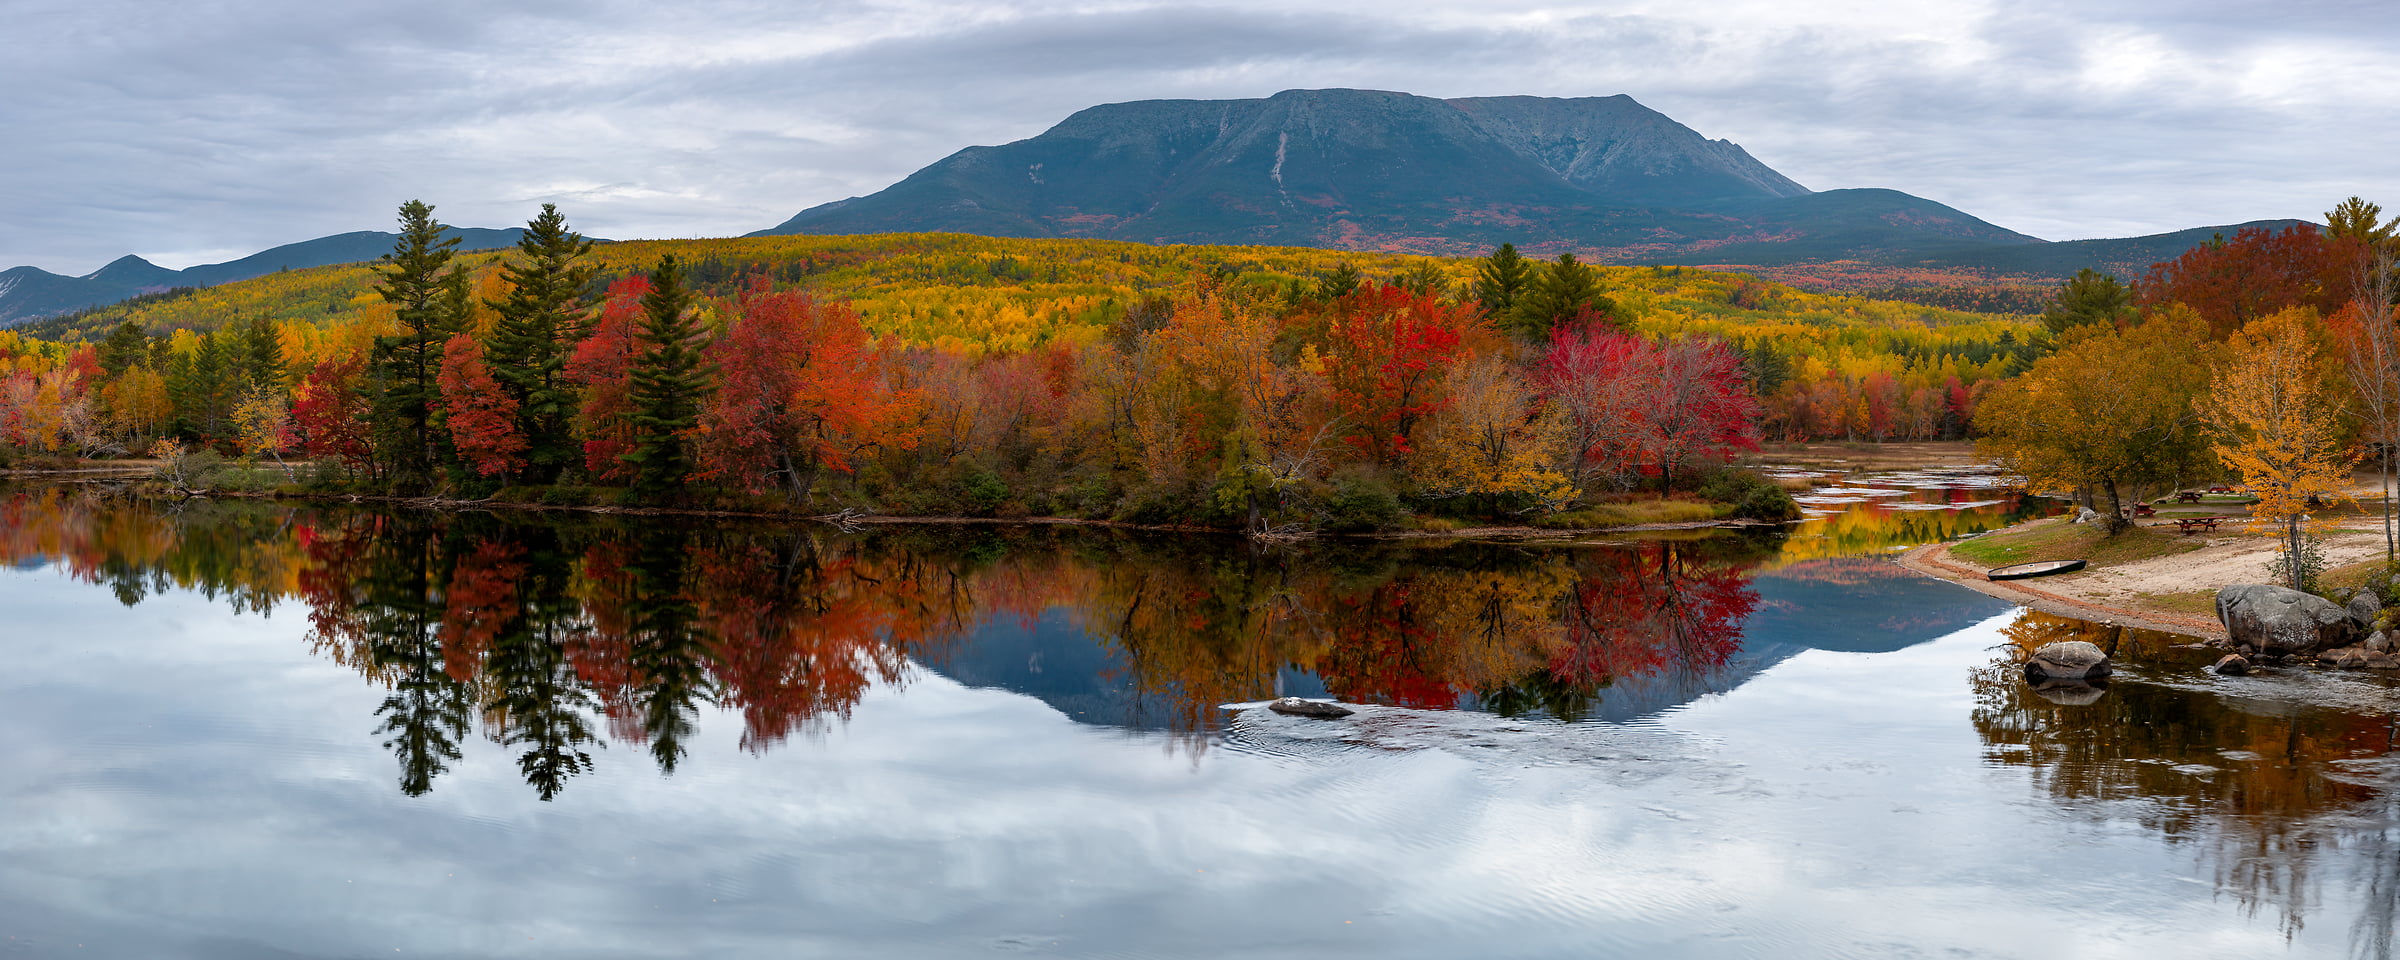 1,309 megapixels! A very high resolution, large-format VAST photo print of Mt. Katahdin behind a lake in autumn; photograph created by Aaron Priest in Millinocket, Maine.